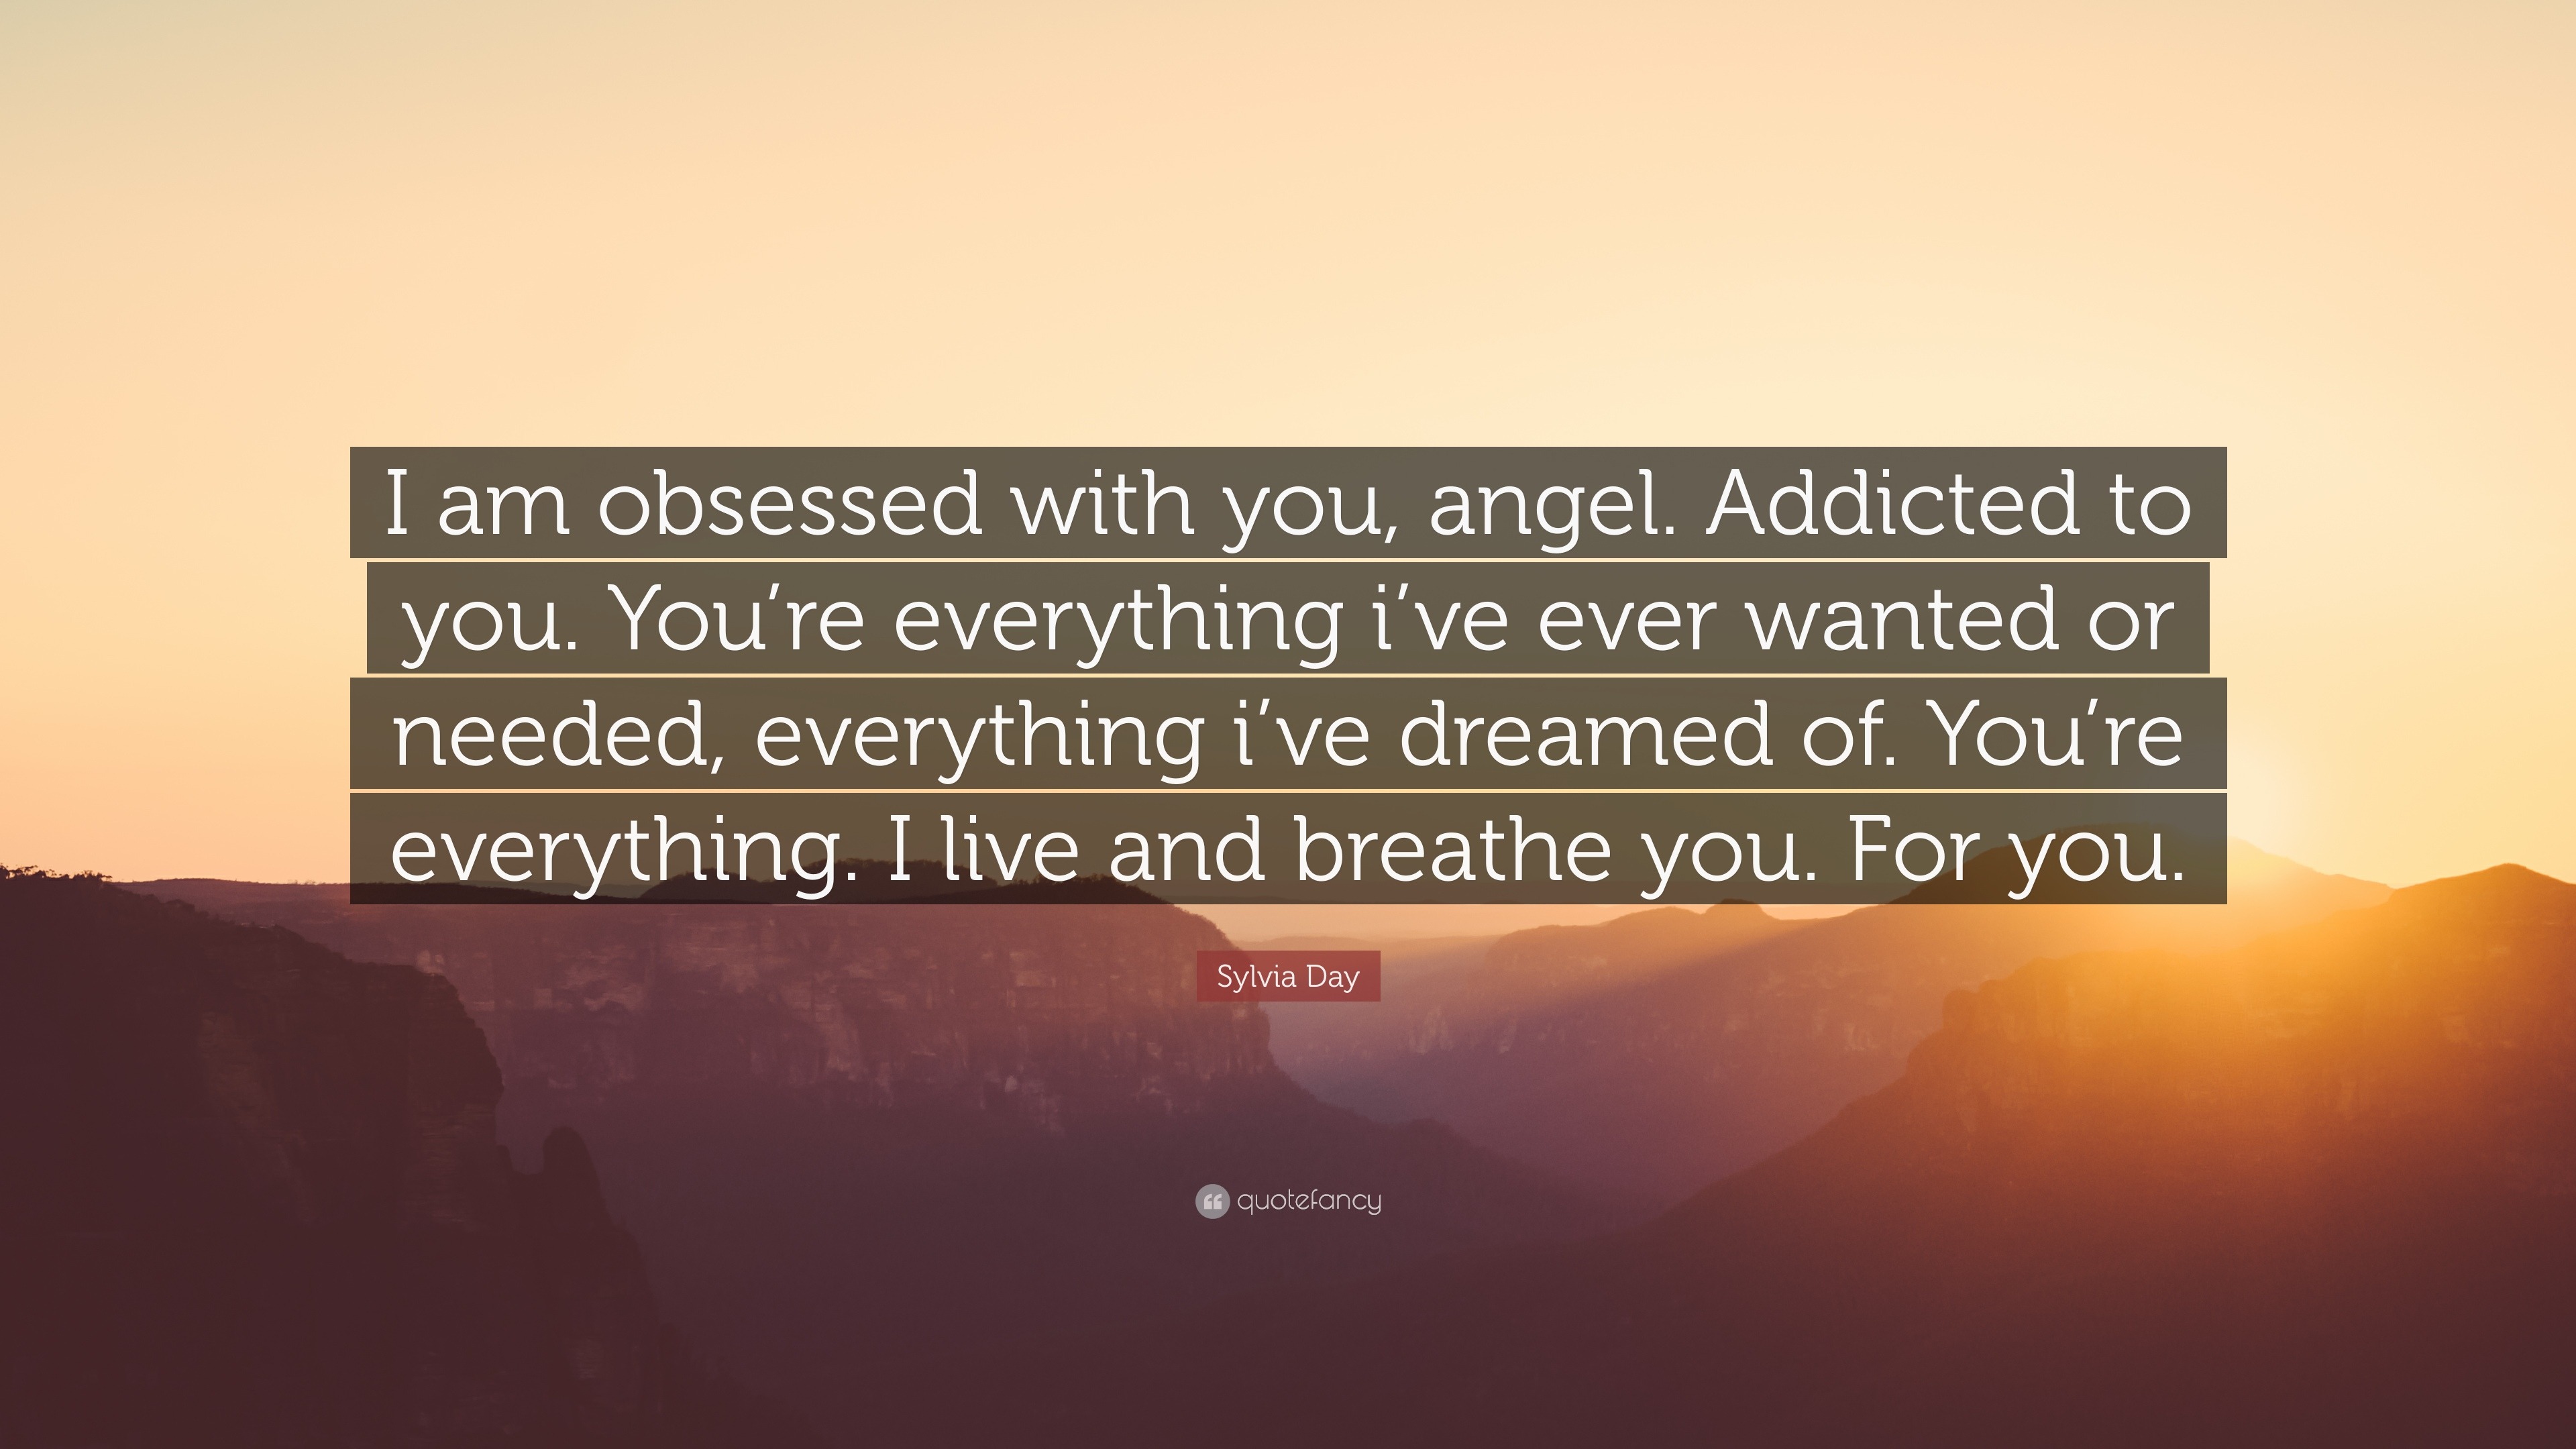 Sylvia Day Quote: “I am obsessed with you, angel. Addicted to you